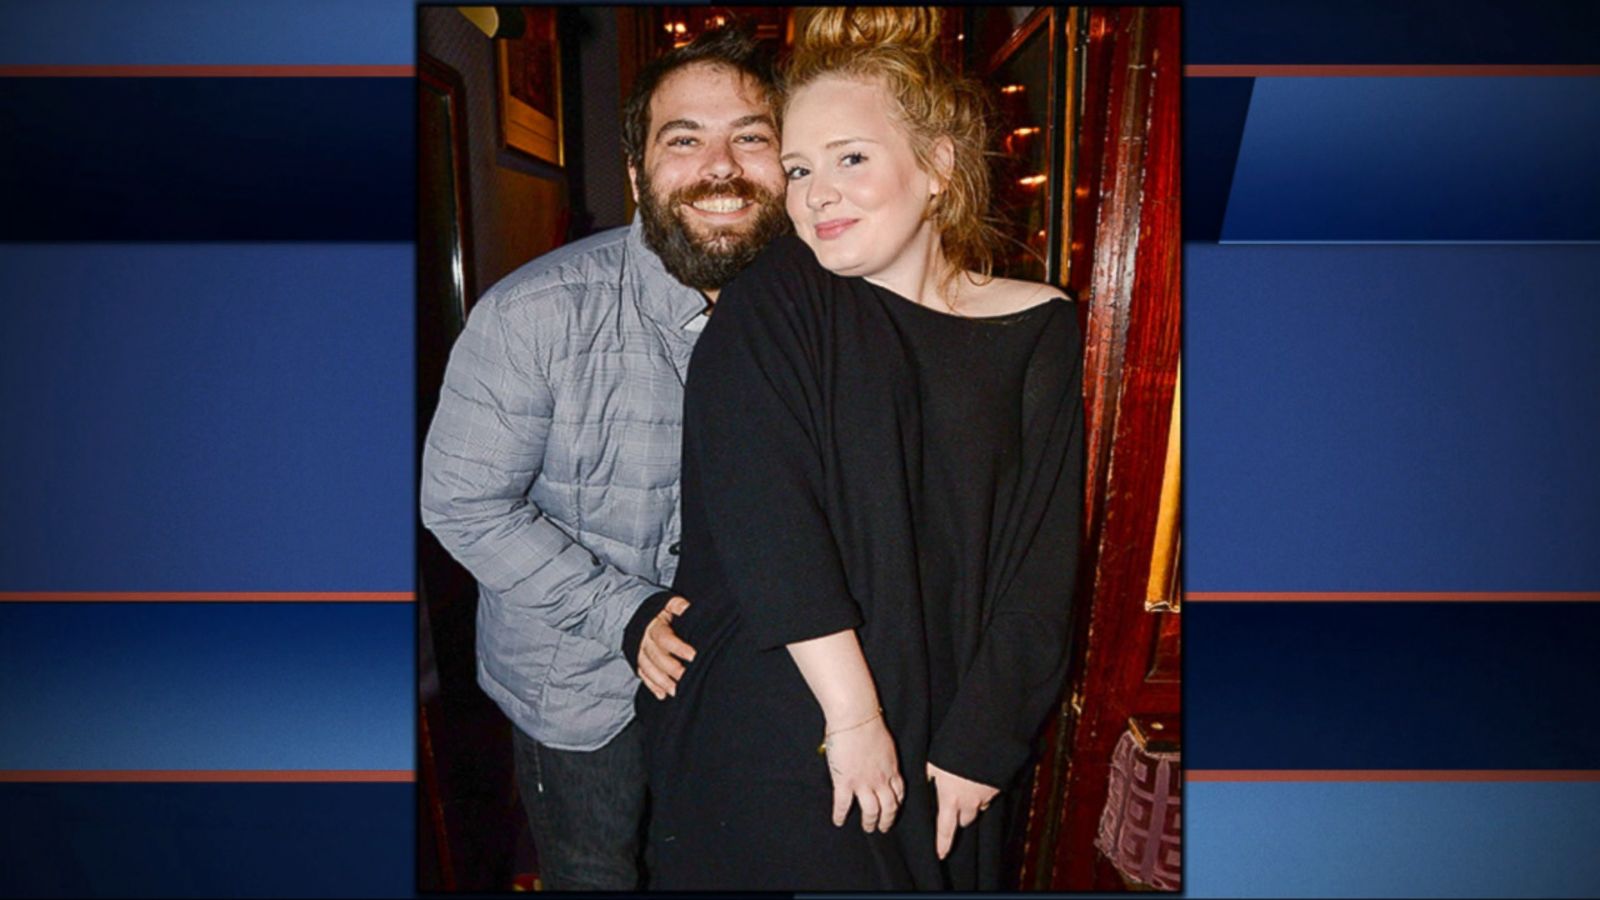 Adele finally confirms she's married Good Morning America